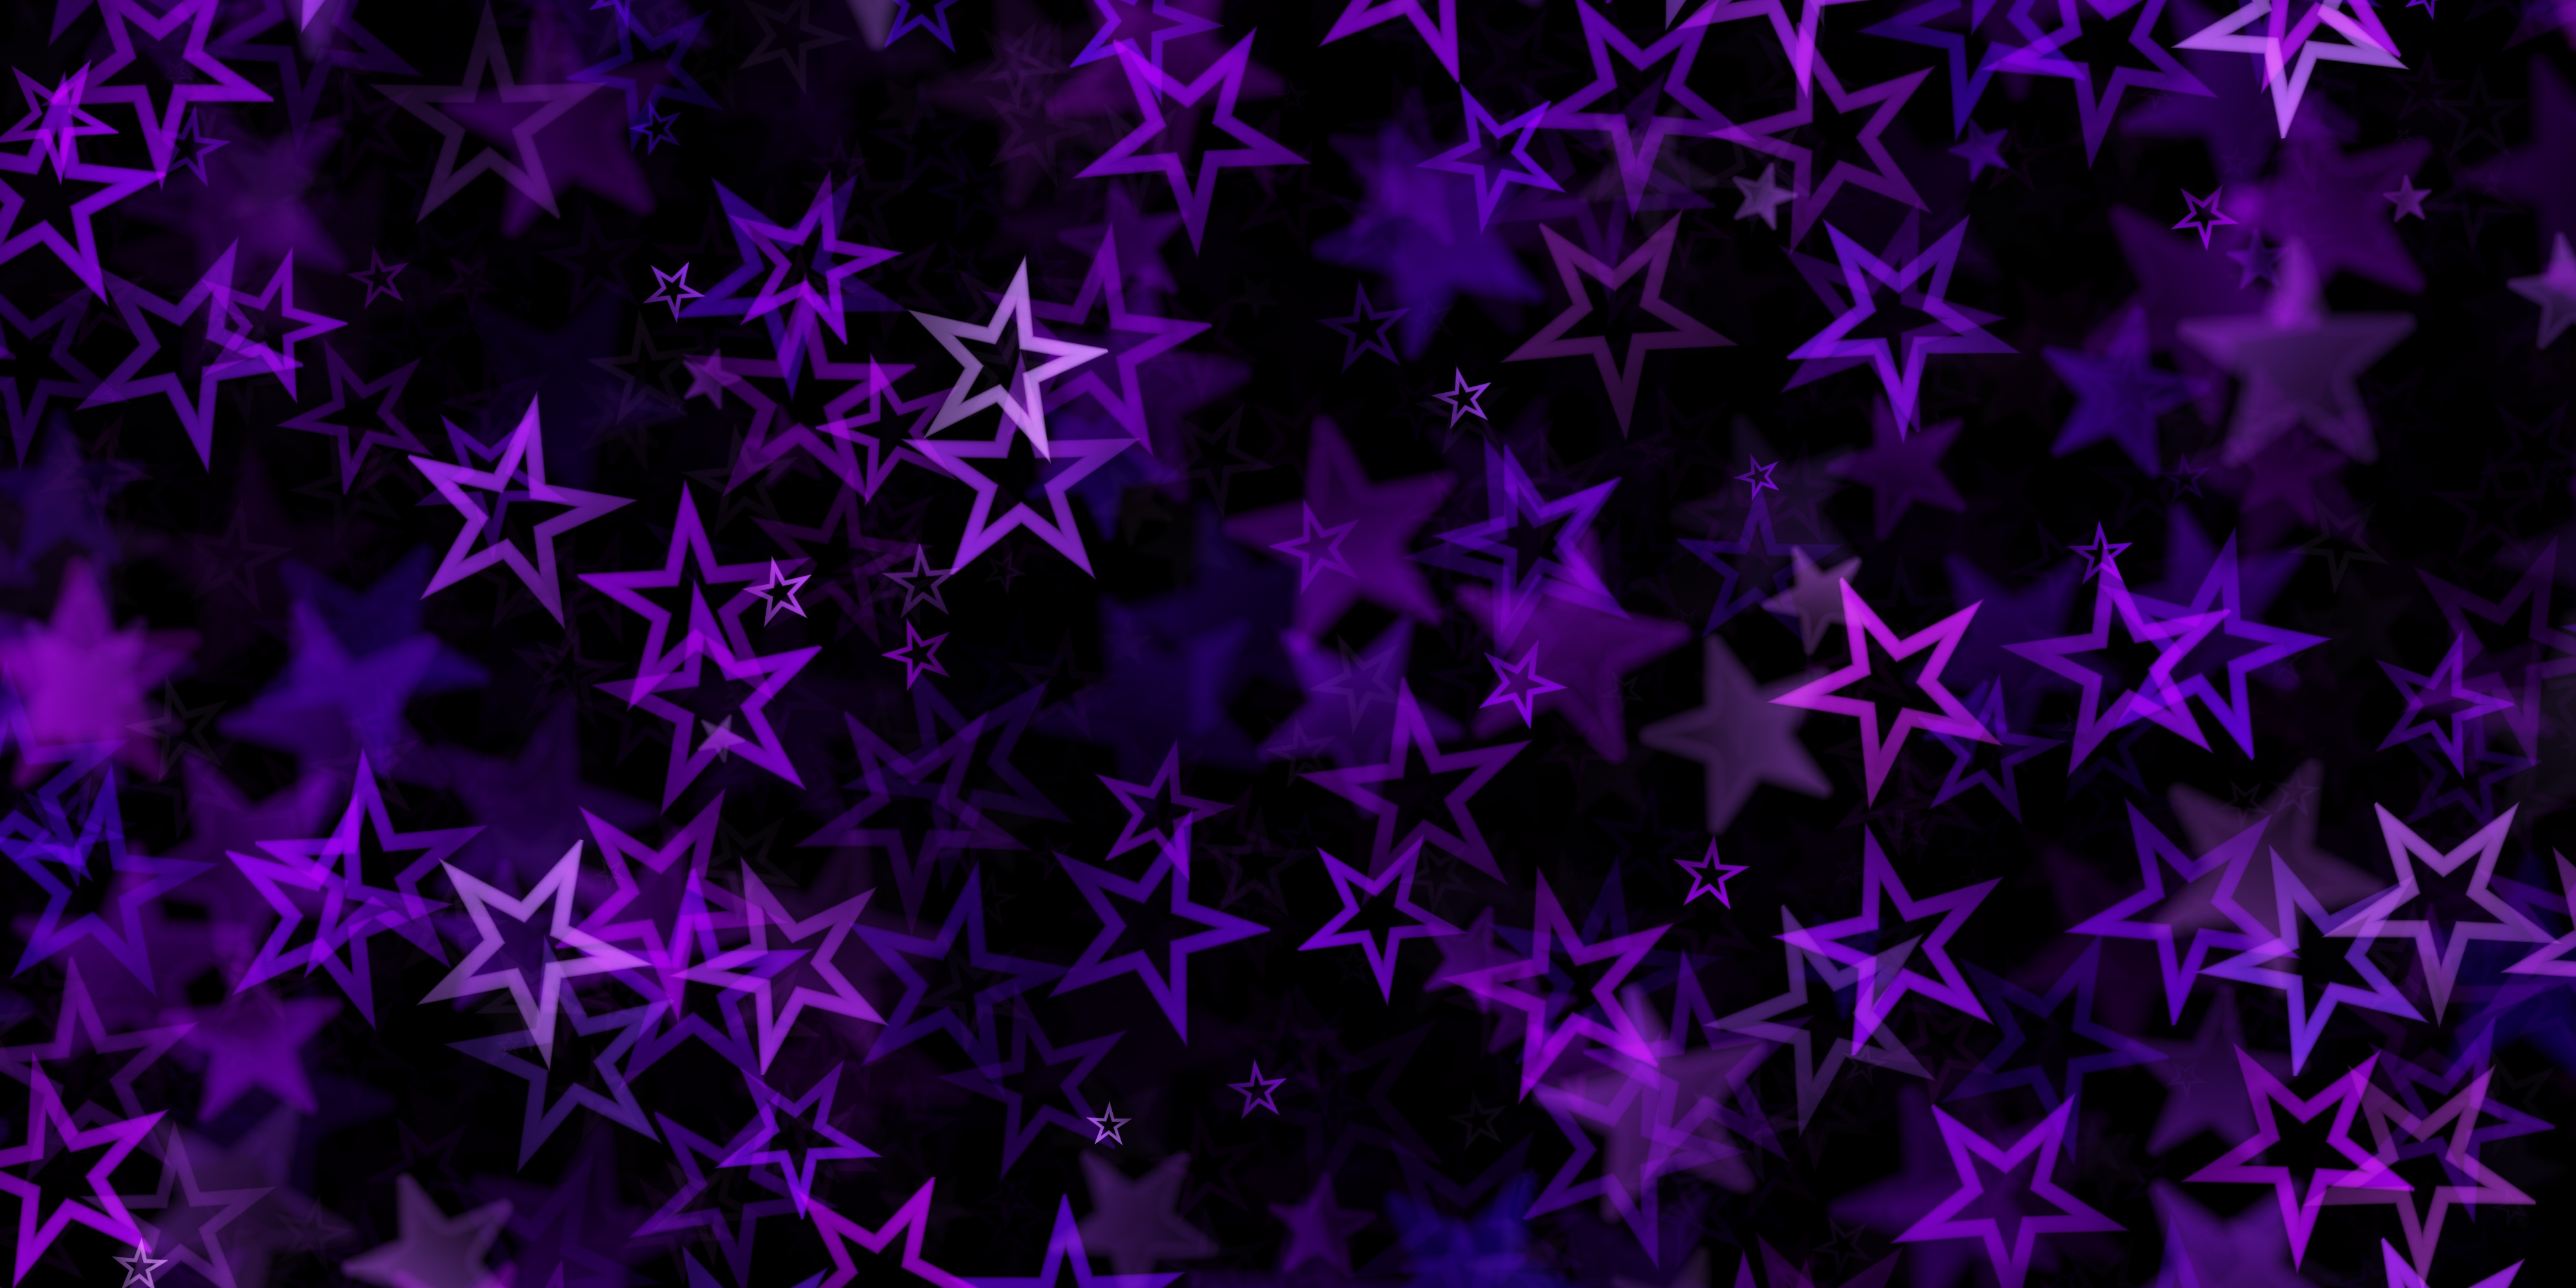 Black background with purple stars free image download